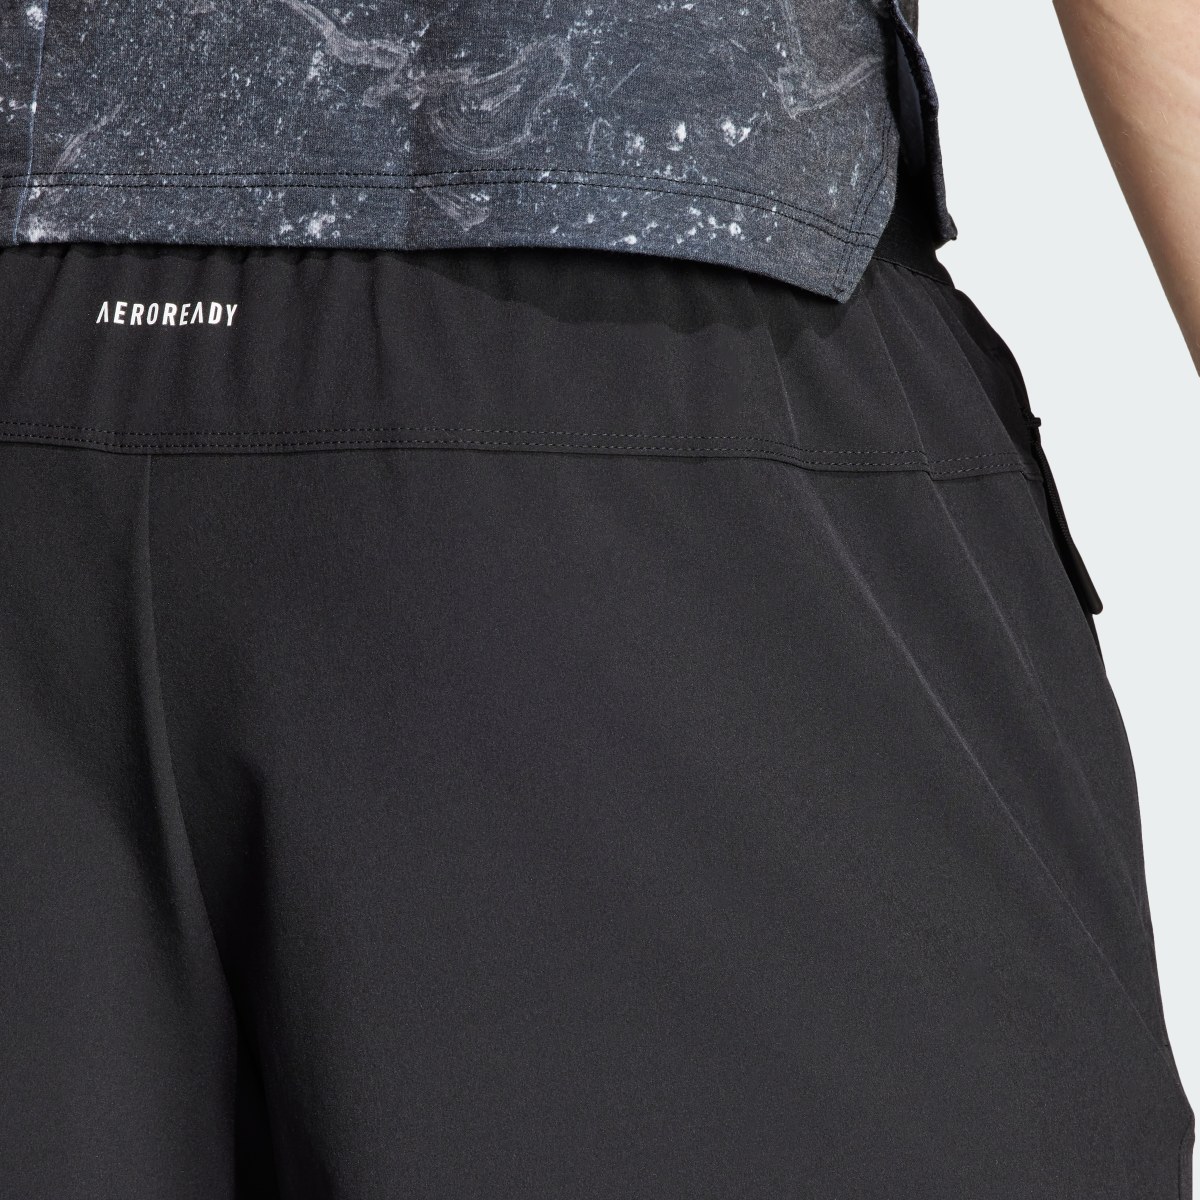 Adidas Power Workout 2-in-1 Shorts. 6